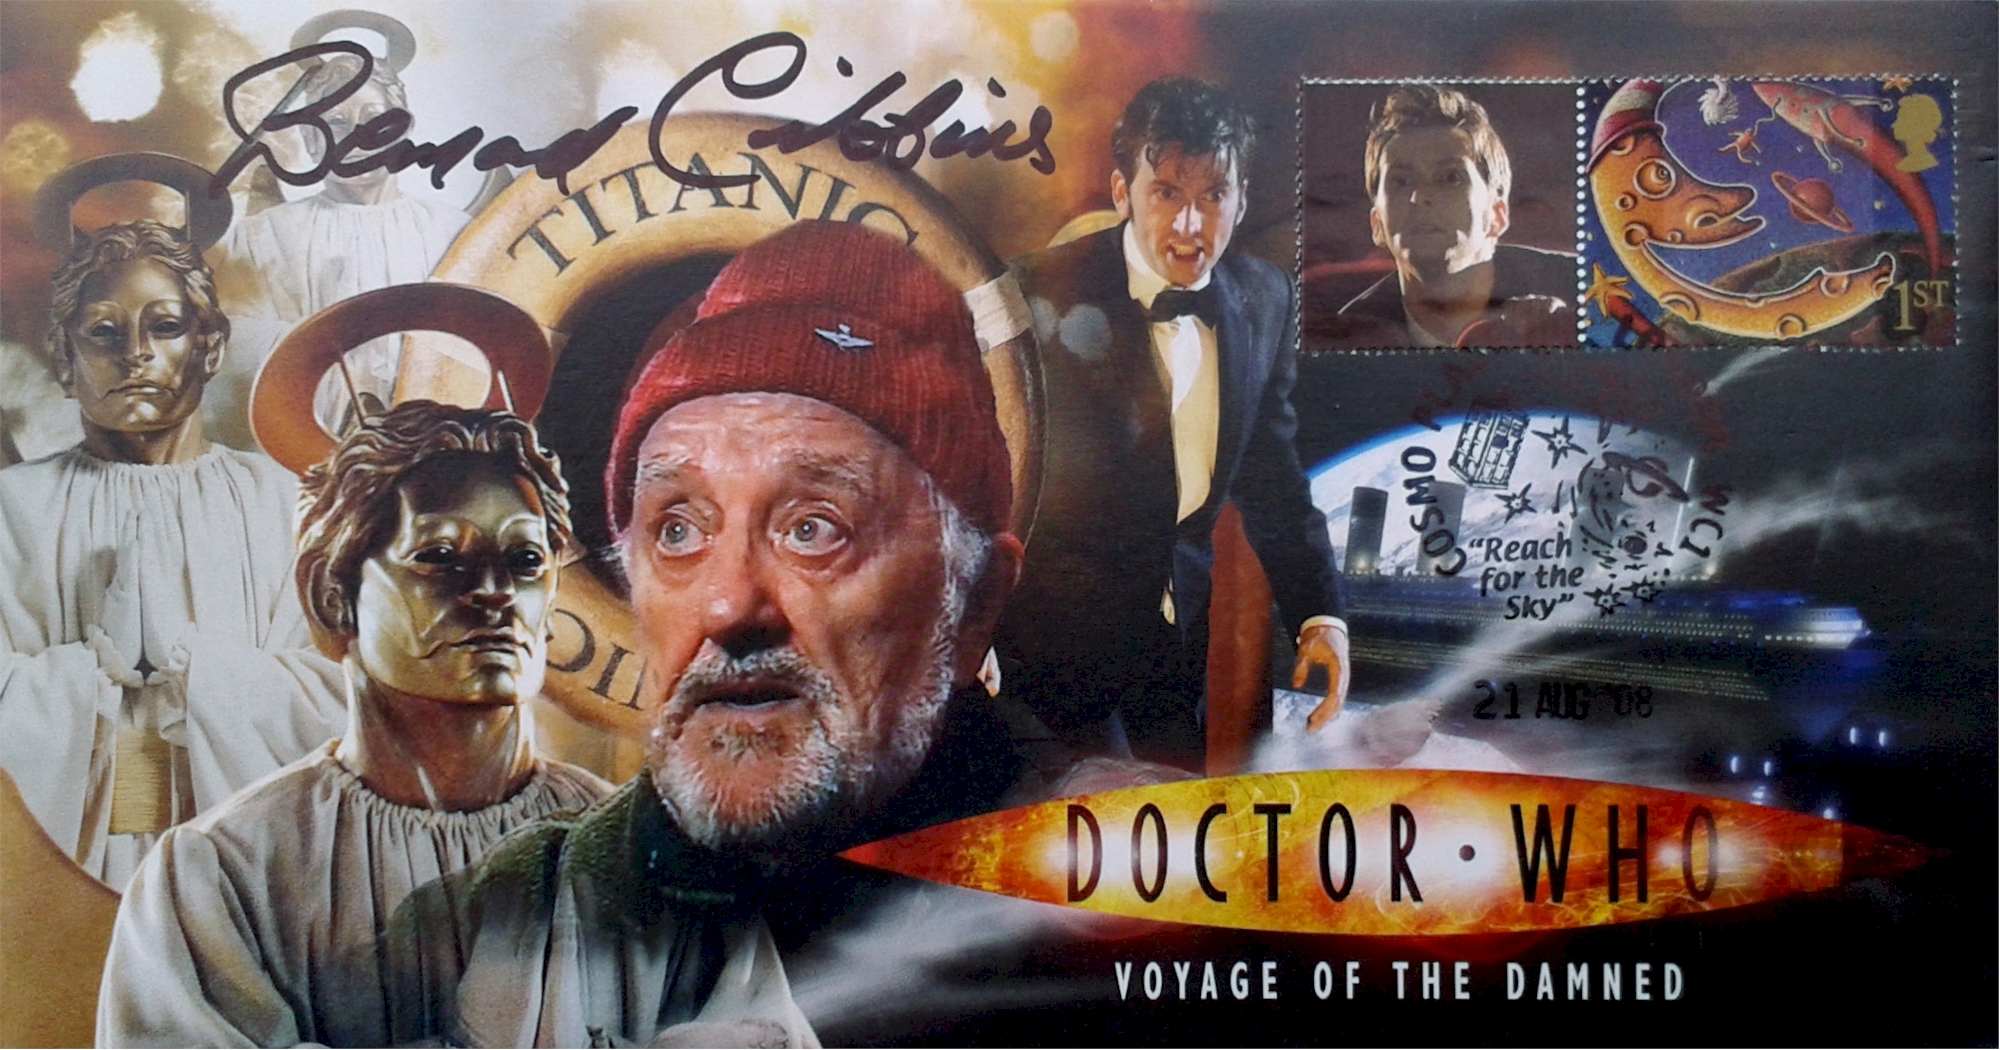 Doctor Who 2007 Series 3 Christmas Special Voyage of the Damned Collectible Stamp Cover Signed by BERNARD CRIBBINS